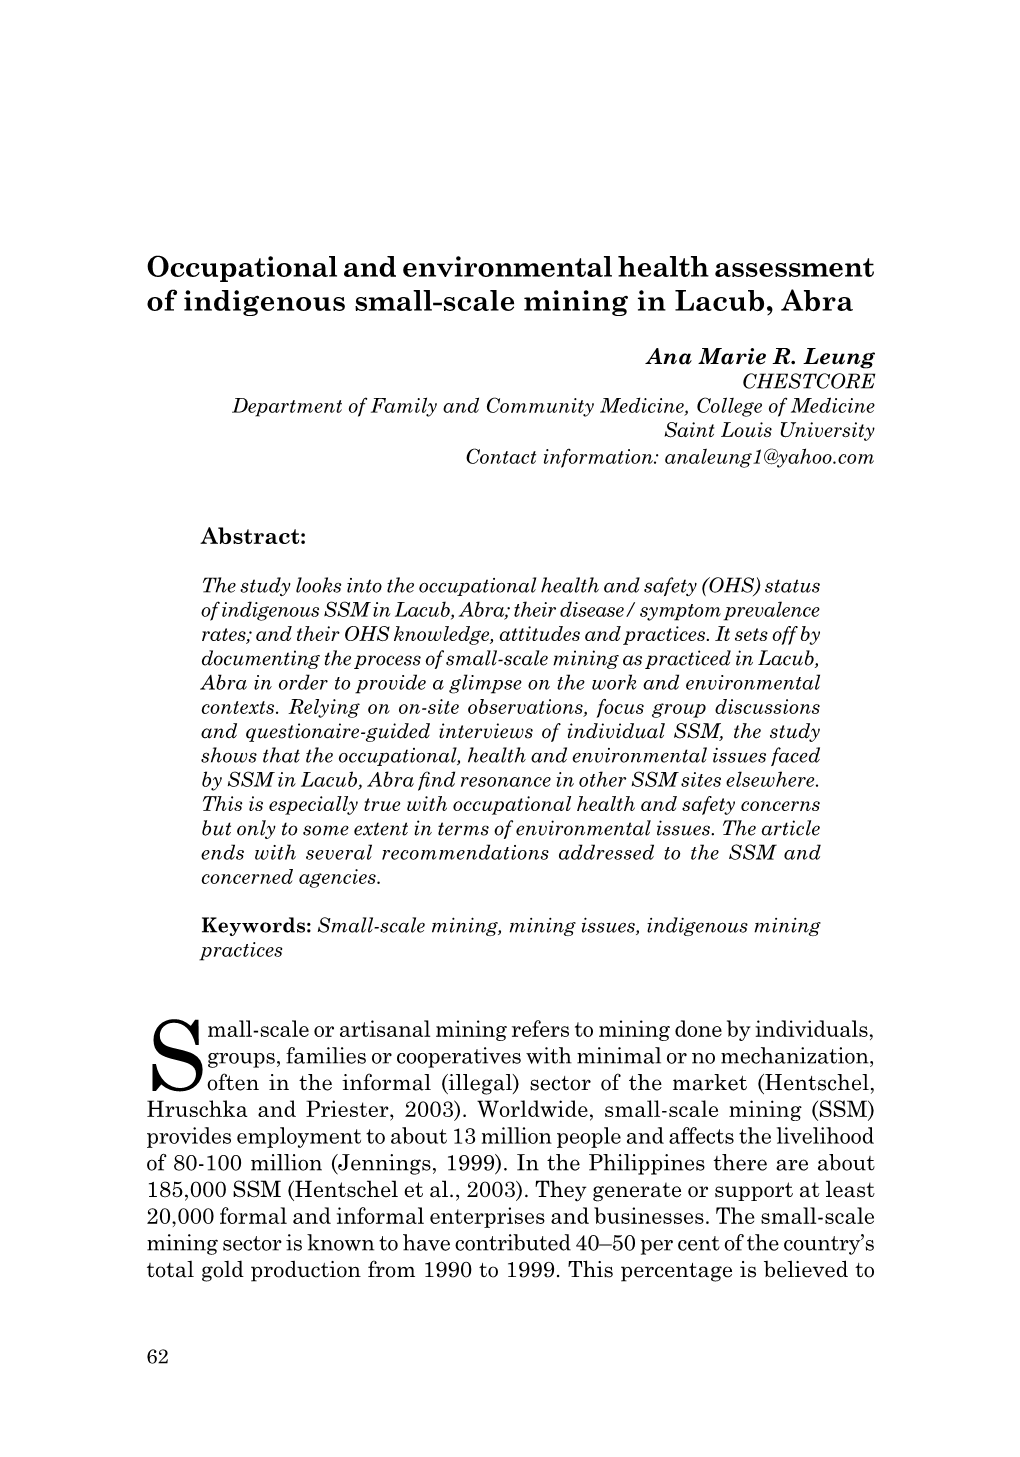 Occupational and Environmental Health Assessment of Indigenous Small-Scale Mining in Lacub, Abra